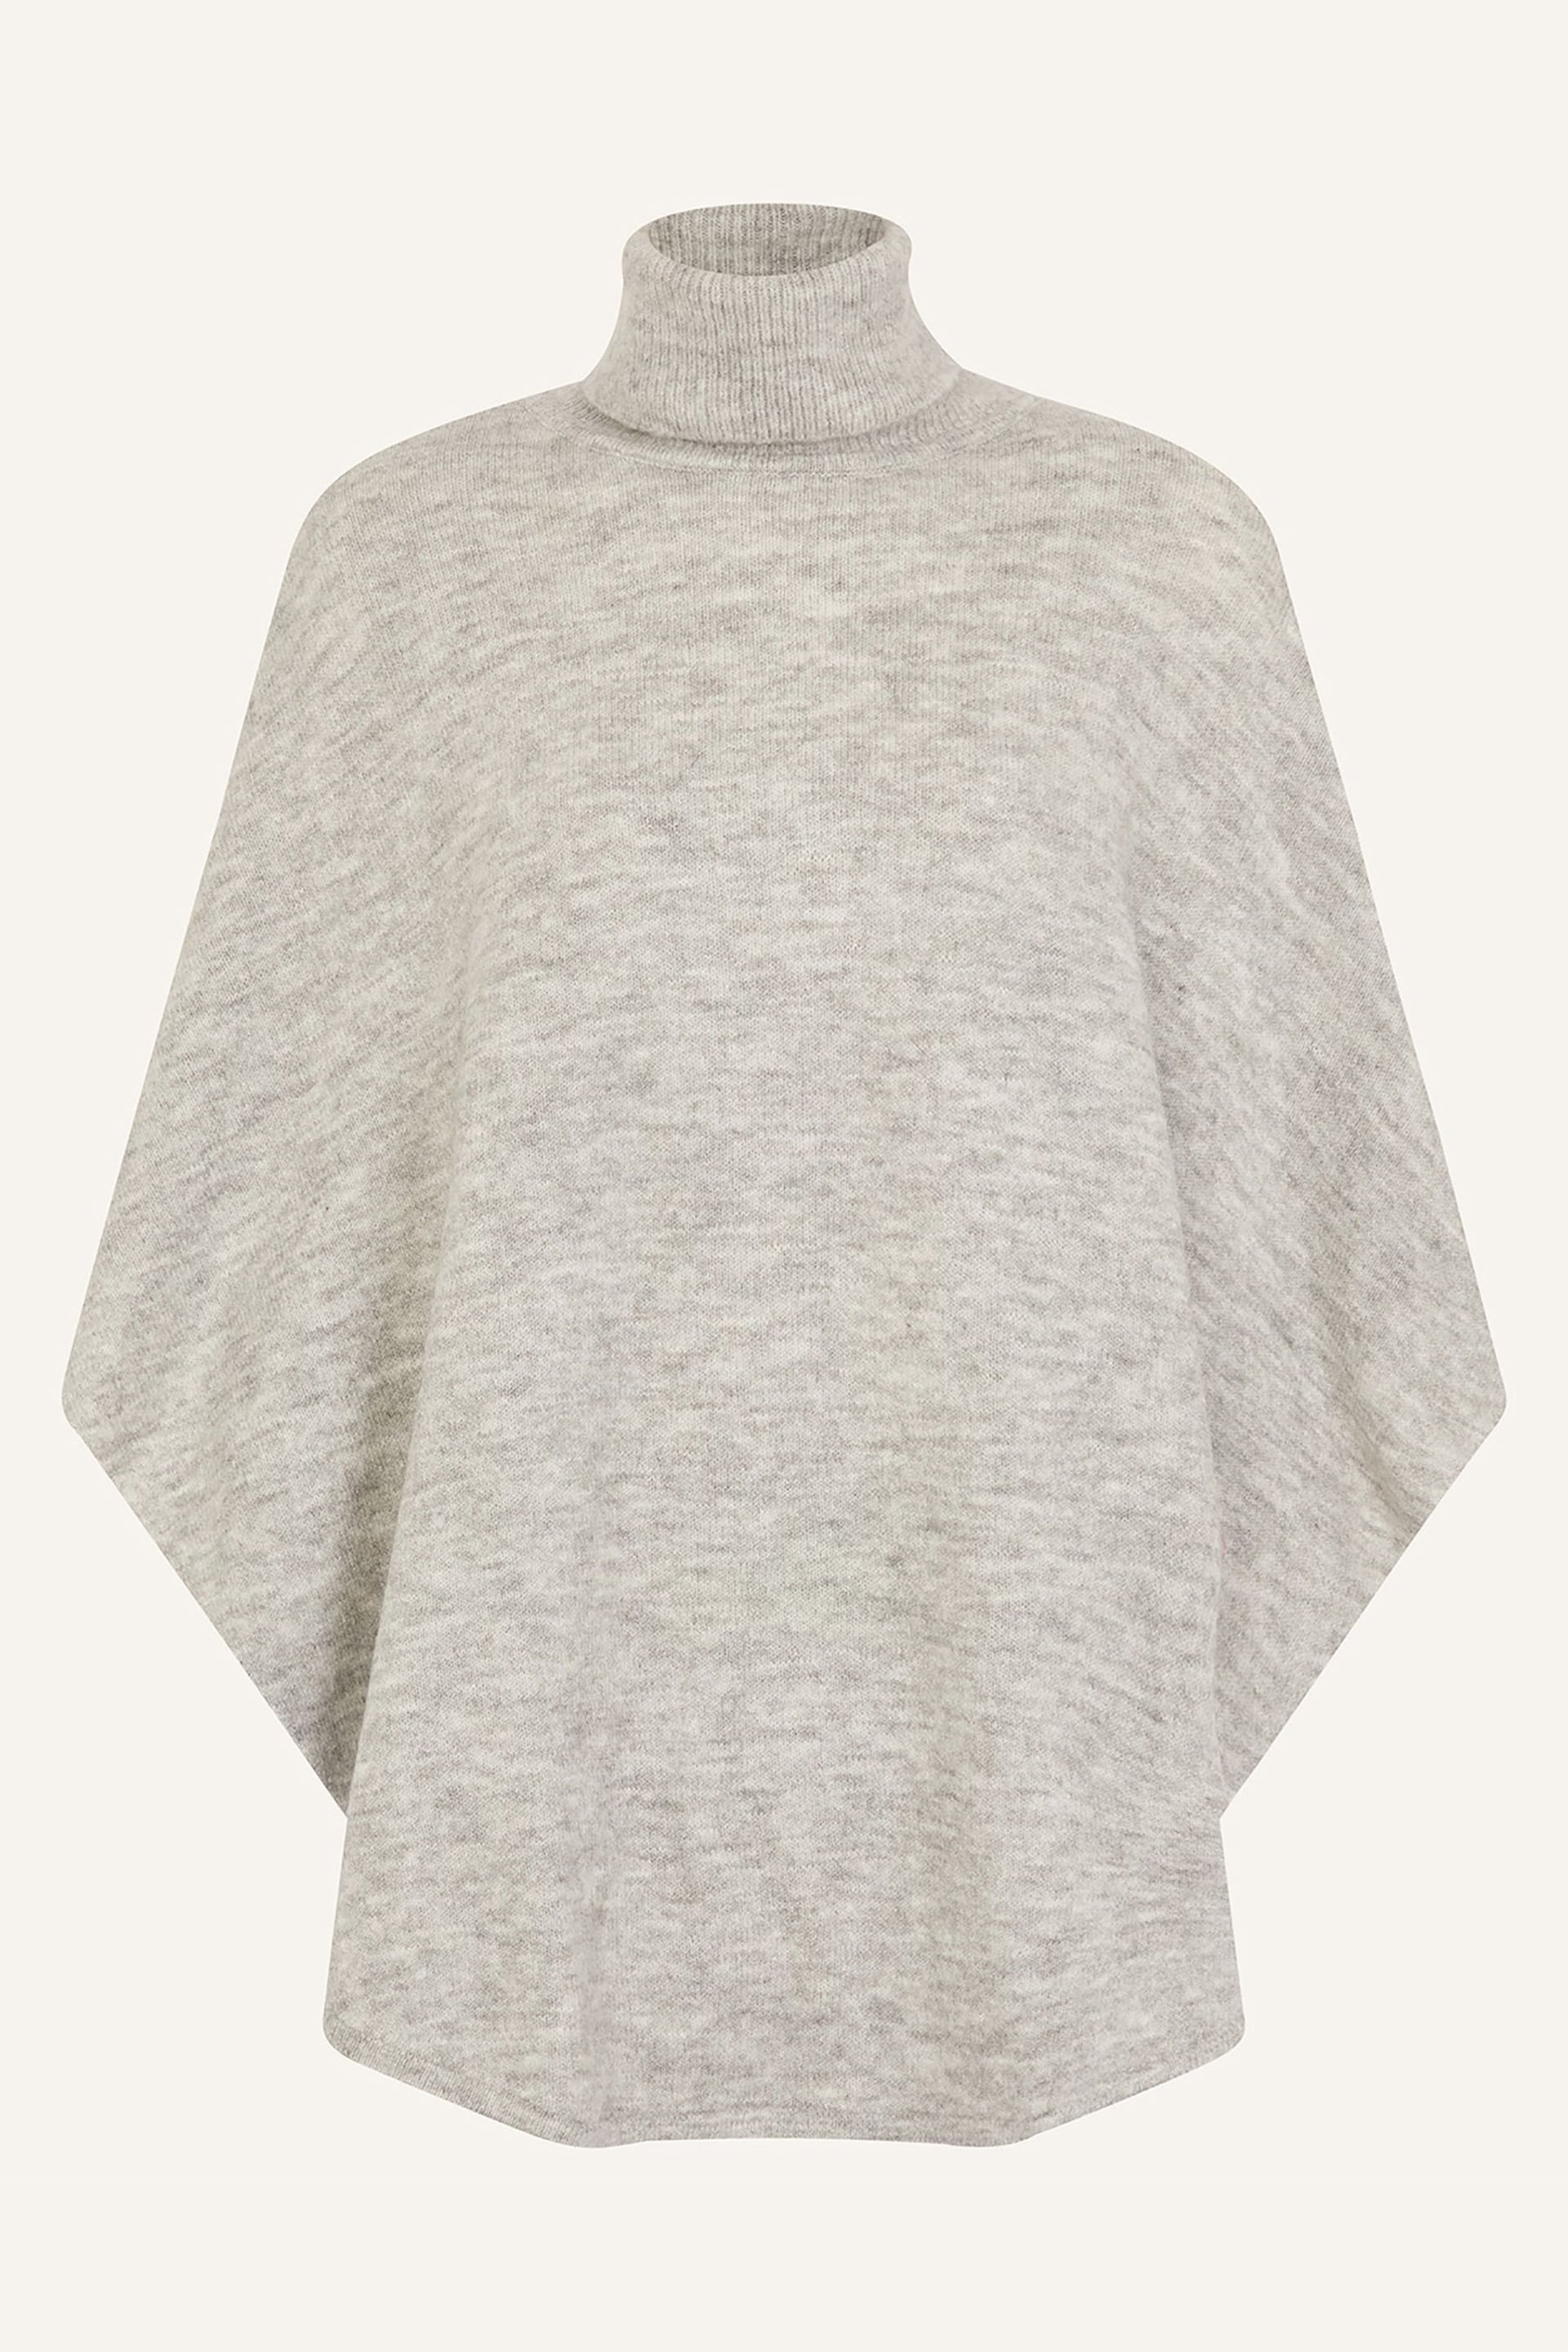 Accessorize Grey Cosy Knit Poncho - Image 4 of 4